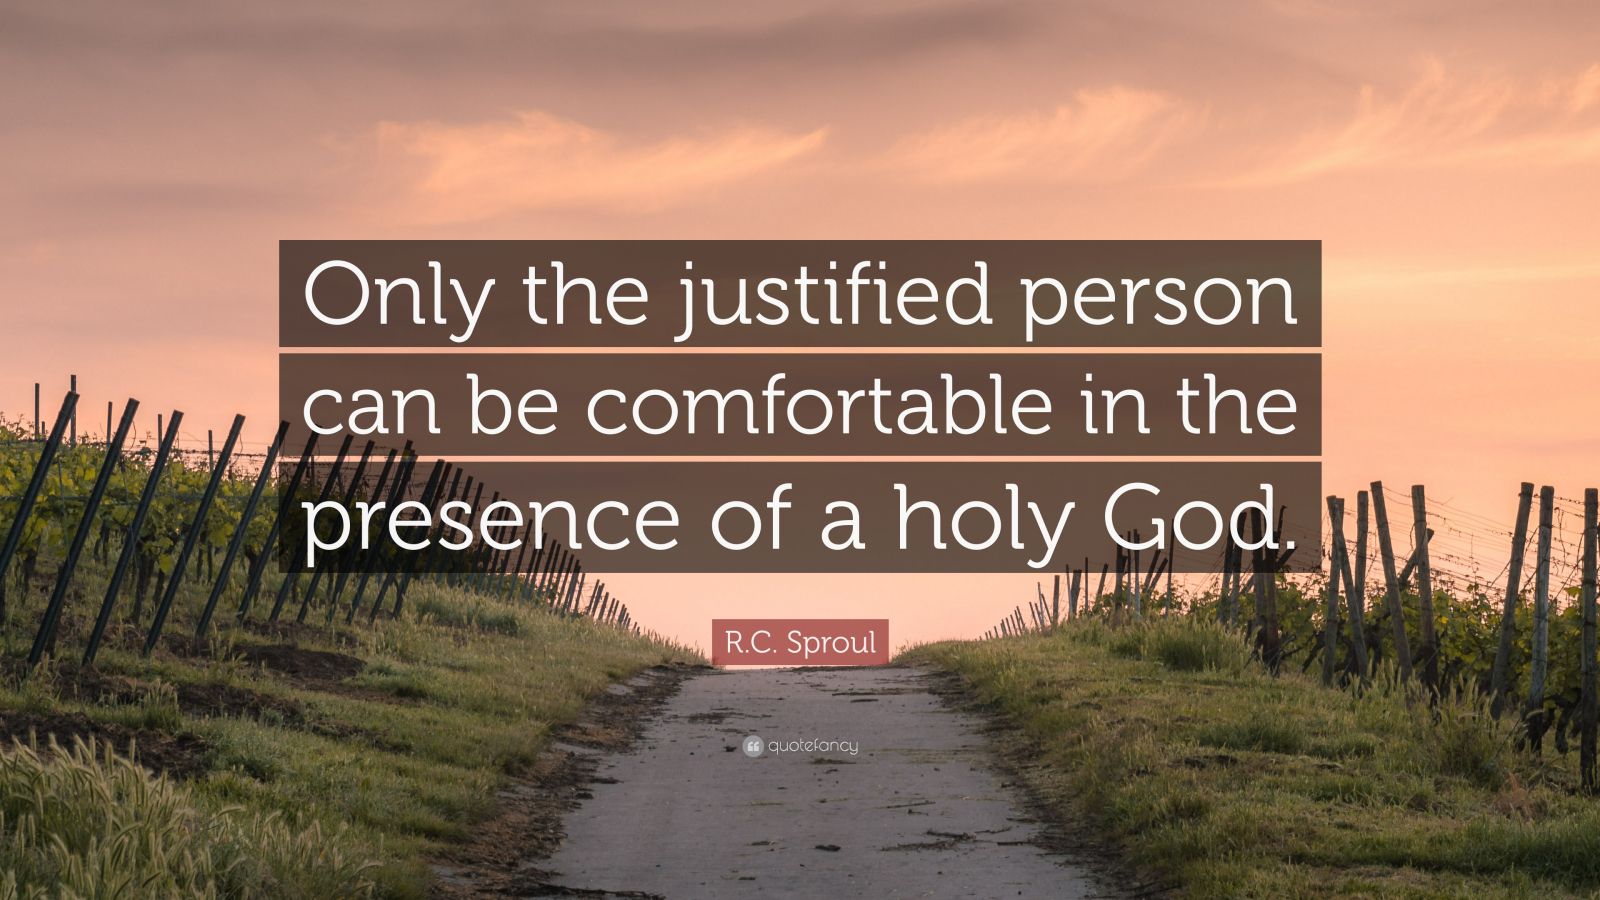 R.C. Sproul Quote: “Only the justified person can be comfortable in the ...